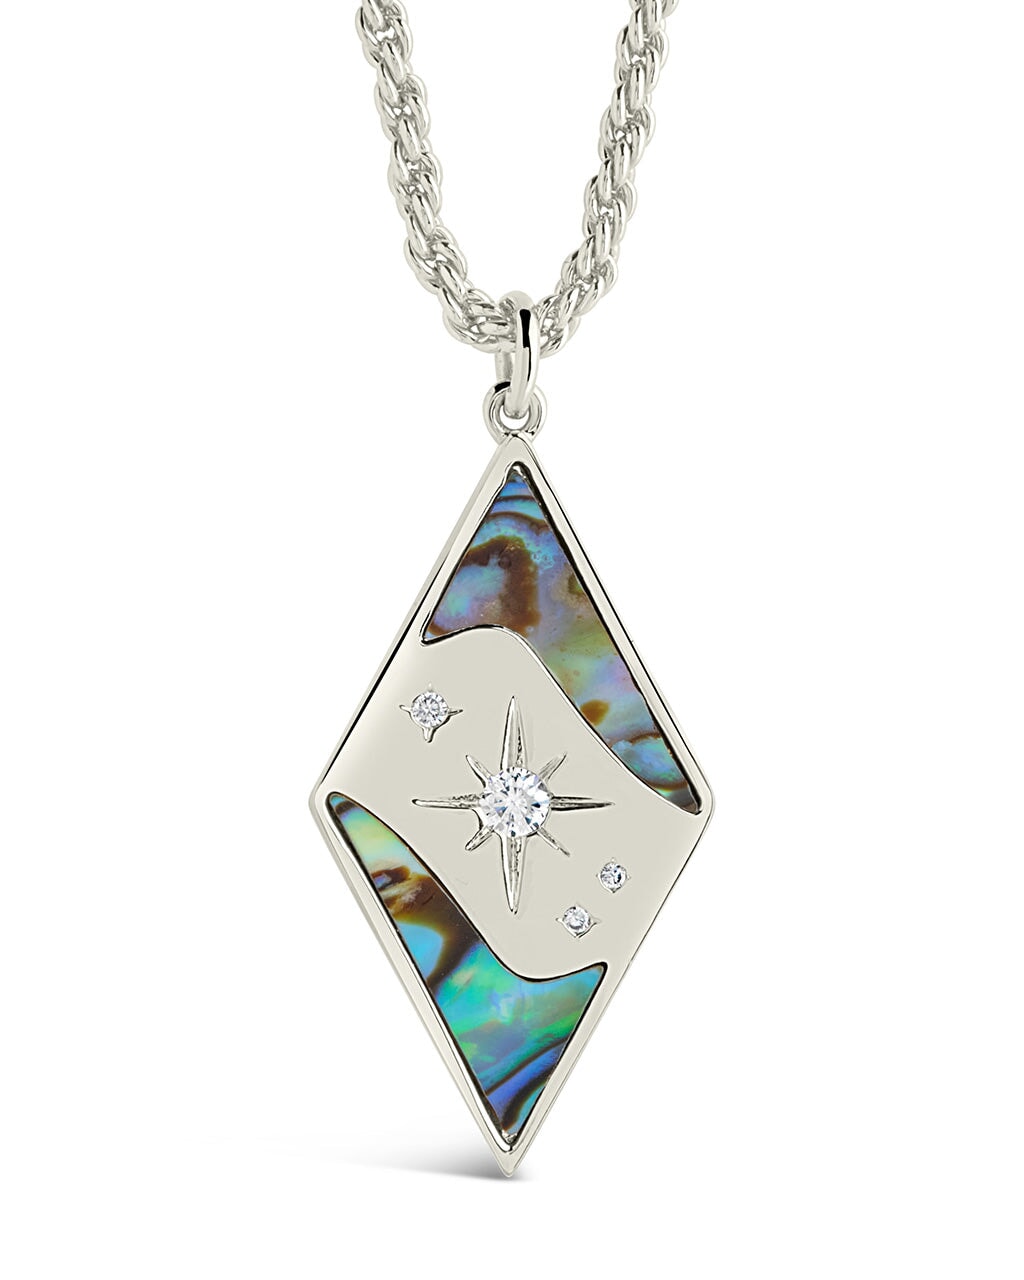 Galaxy CZ & Abalone Pendant Necklace Necklace Sterling Forever Silver 